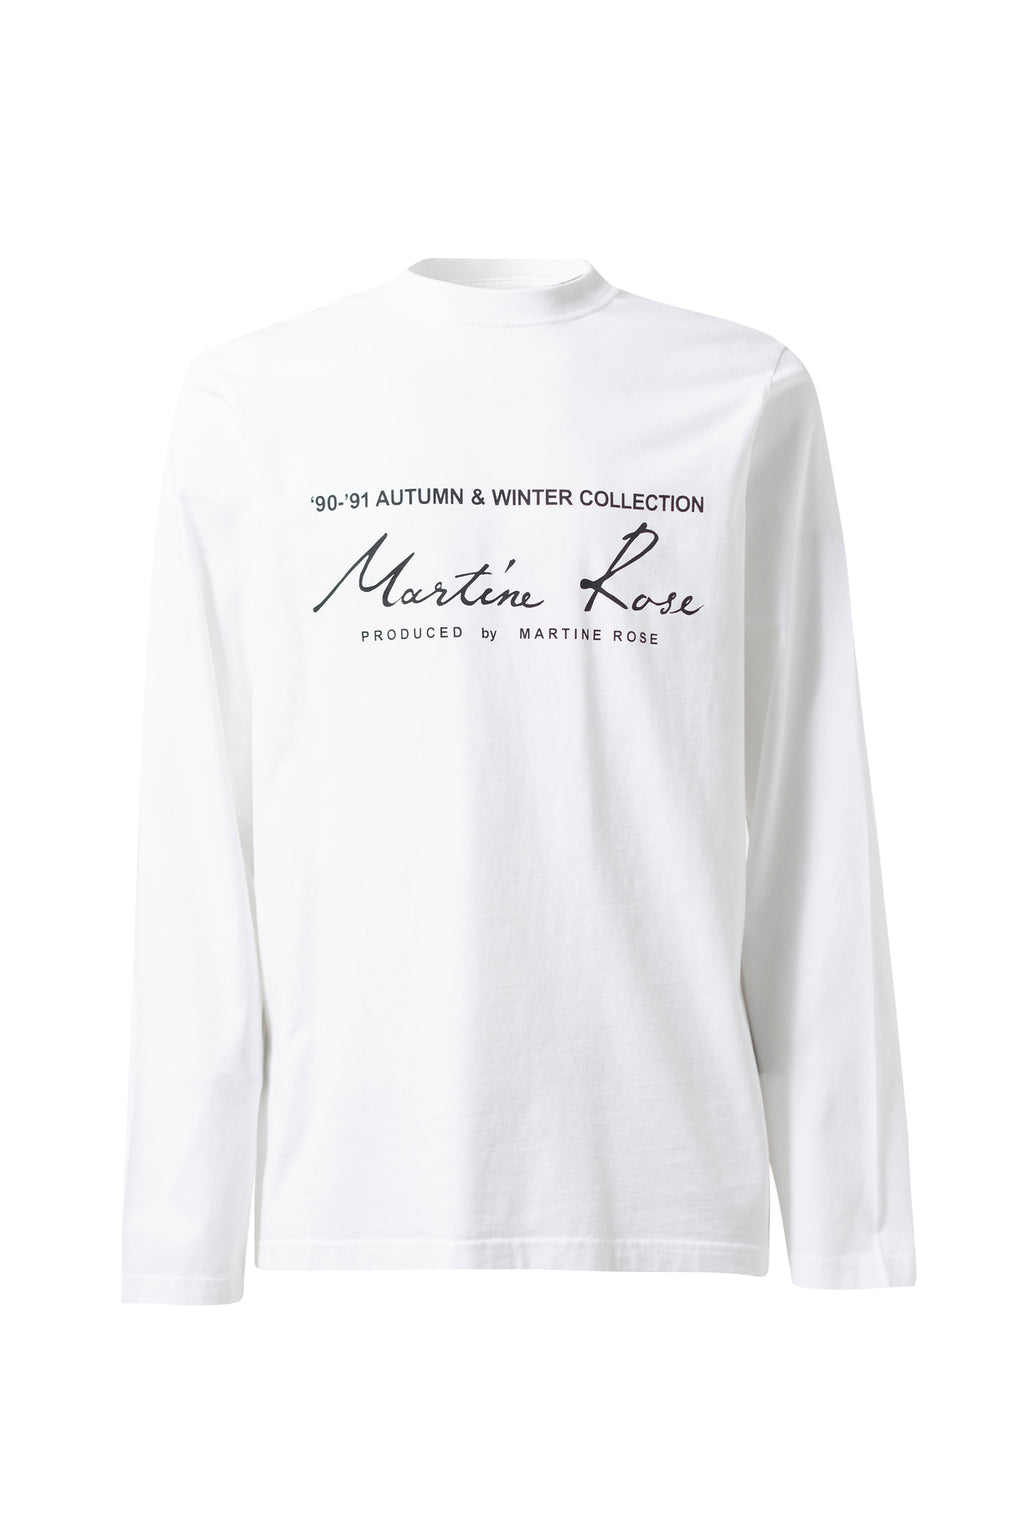 MARTINE ROSE kids' t-shirts, compare prices and buy online